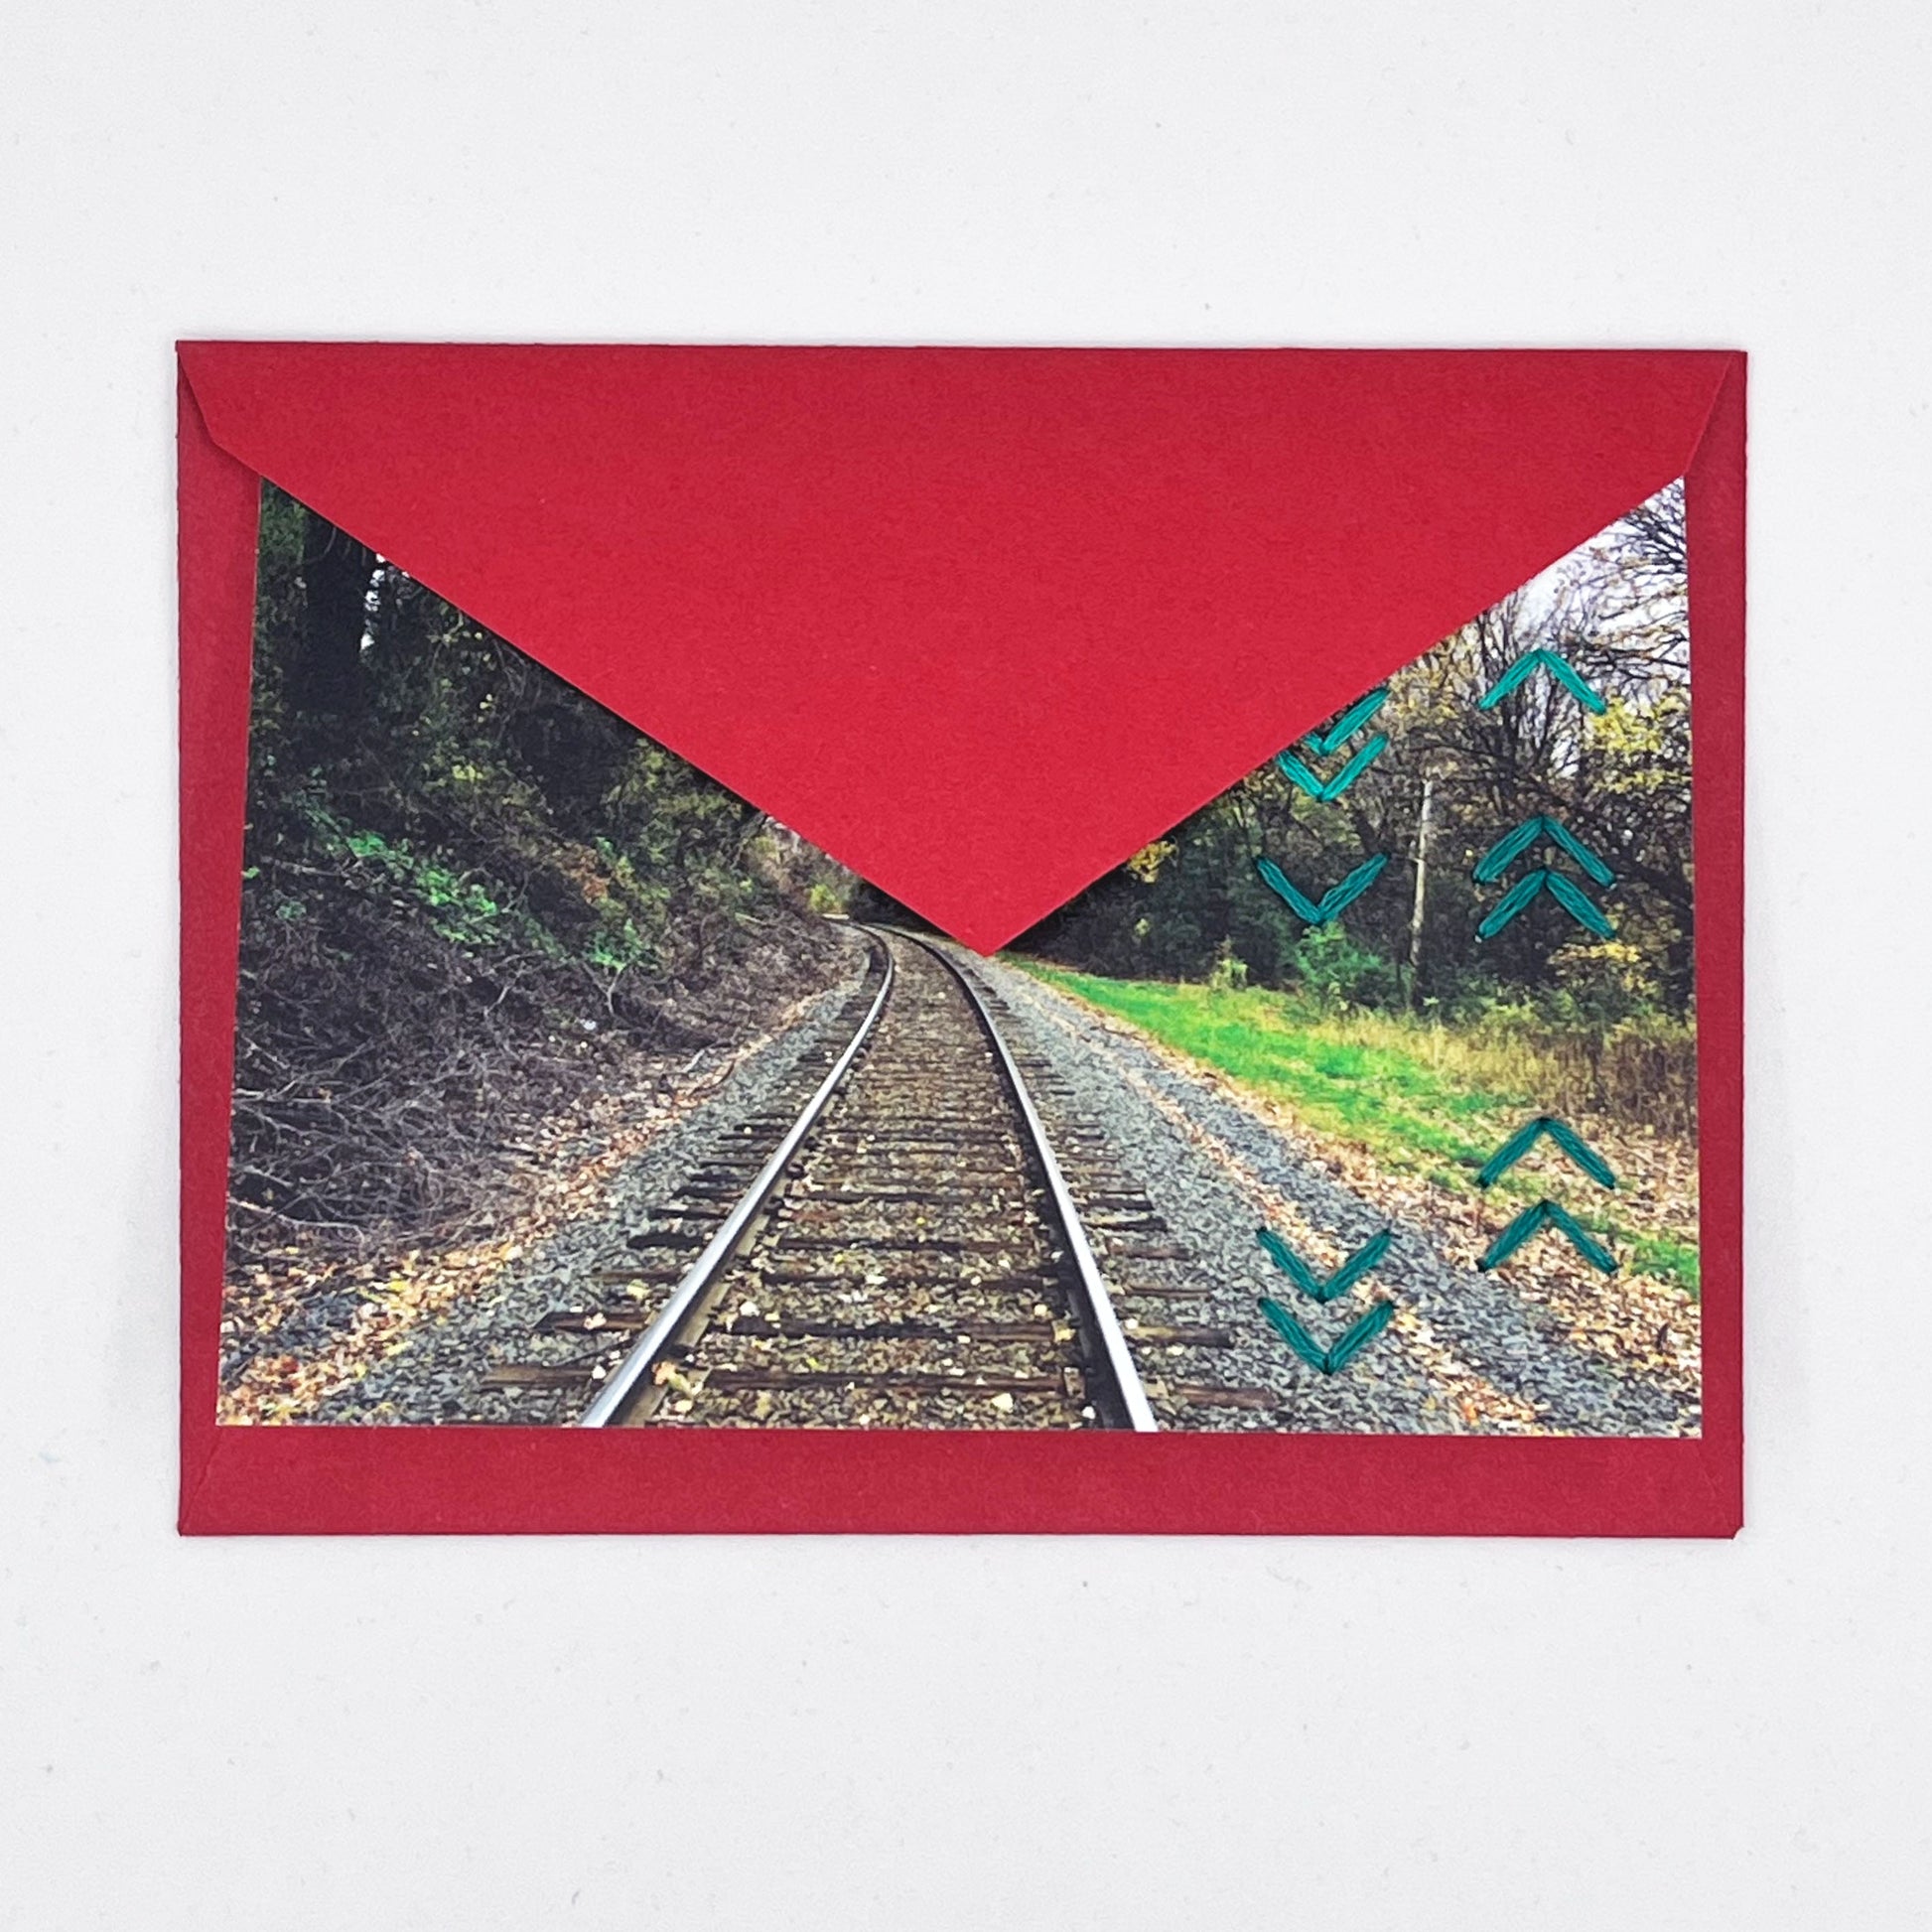 Greeting card flat on a red envelope, tucked under the flap. Photo of train tracks in fall. Rows of teal chevron stitches along right side card